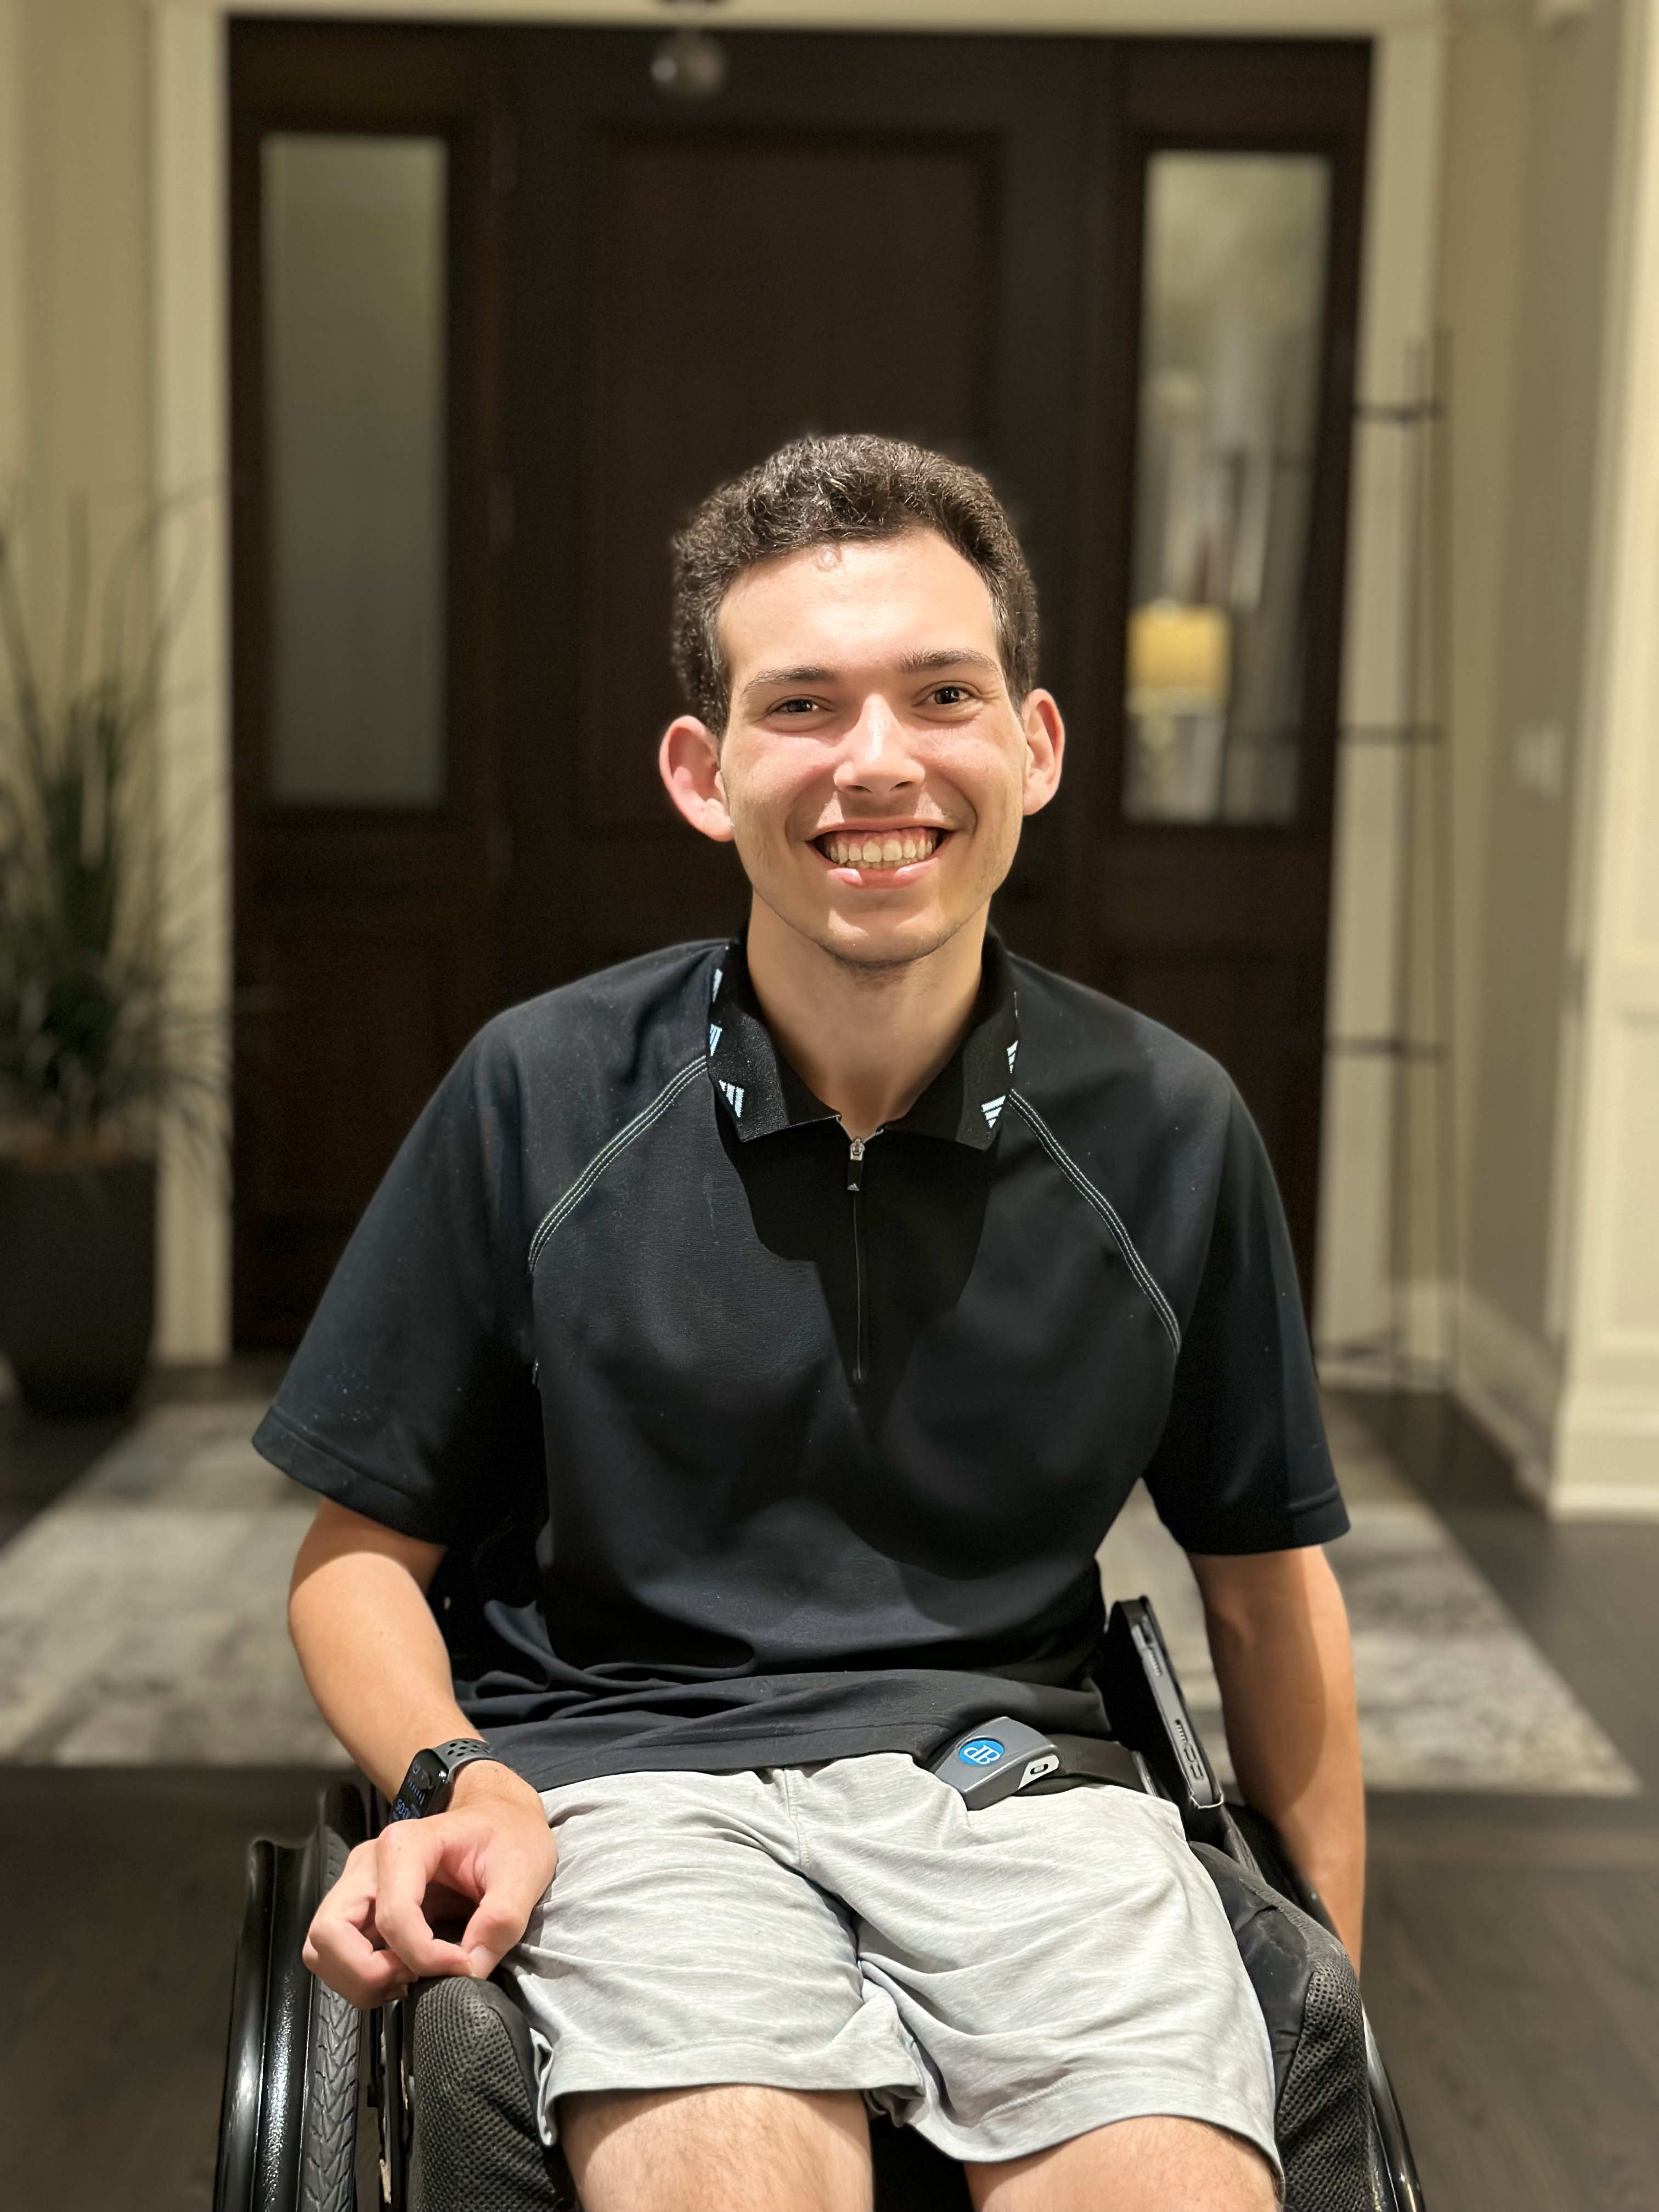 A portrait of Jake Wttewaal, a white young man with short dark hair. He is smiling, wearing a black polo shirt with grey athletic shorts. He is sitting in a wheelchair. 